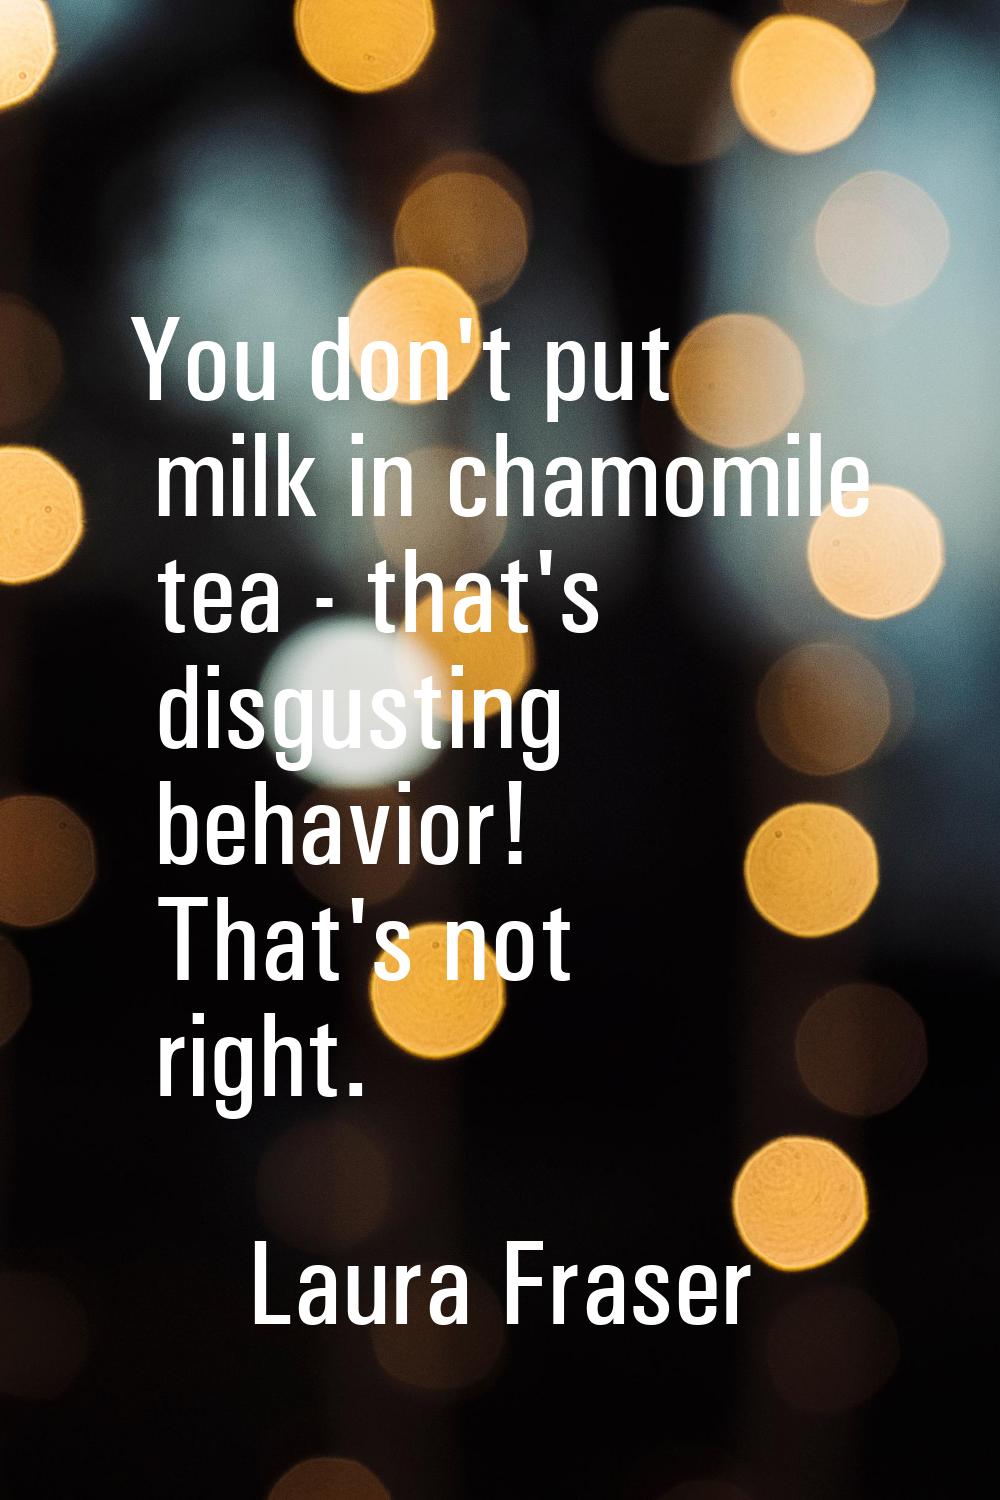 You don't put milk in chamomile tea - that's disgusting behavior! That's not right.